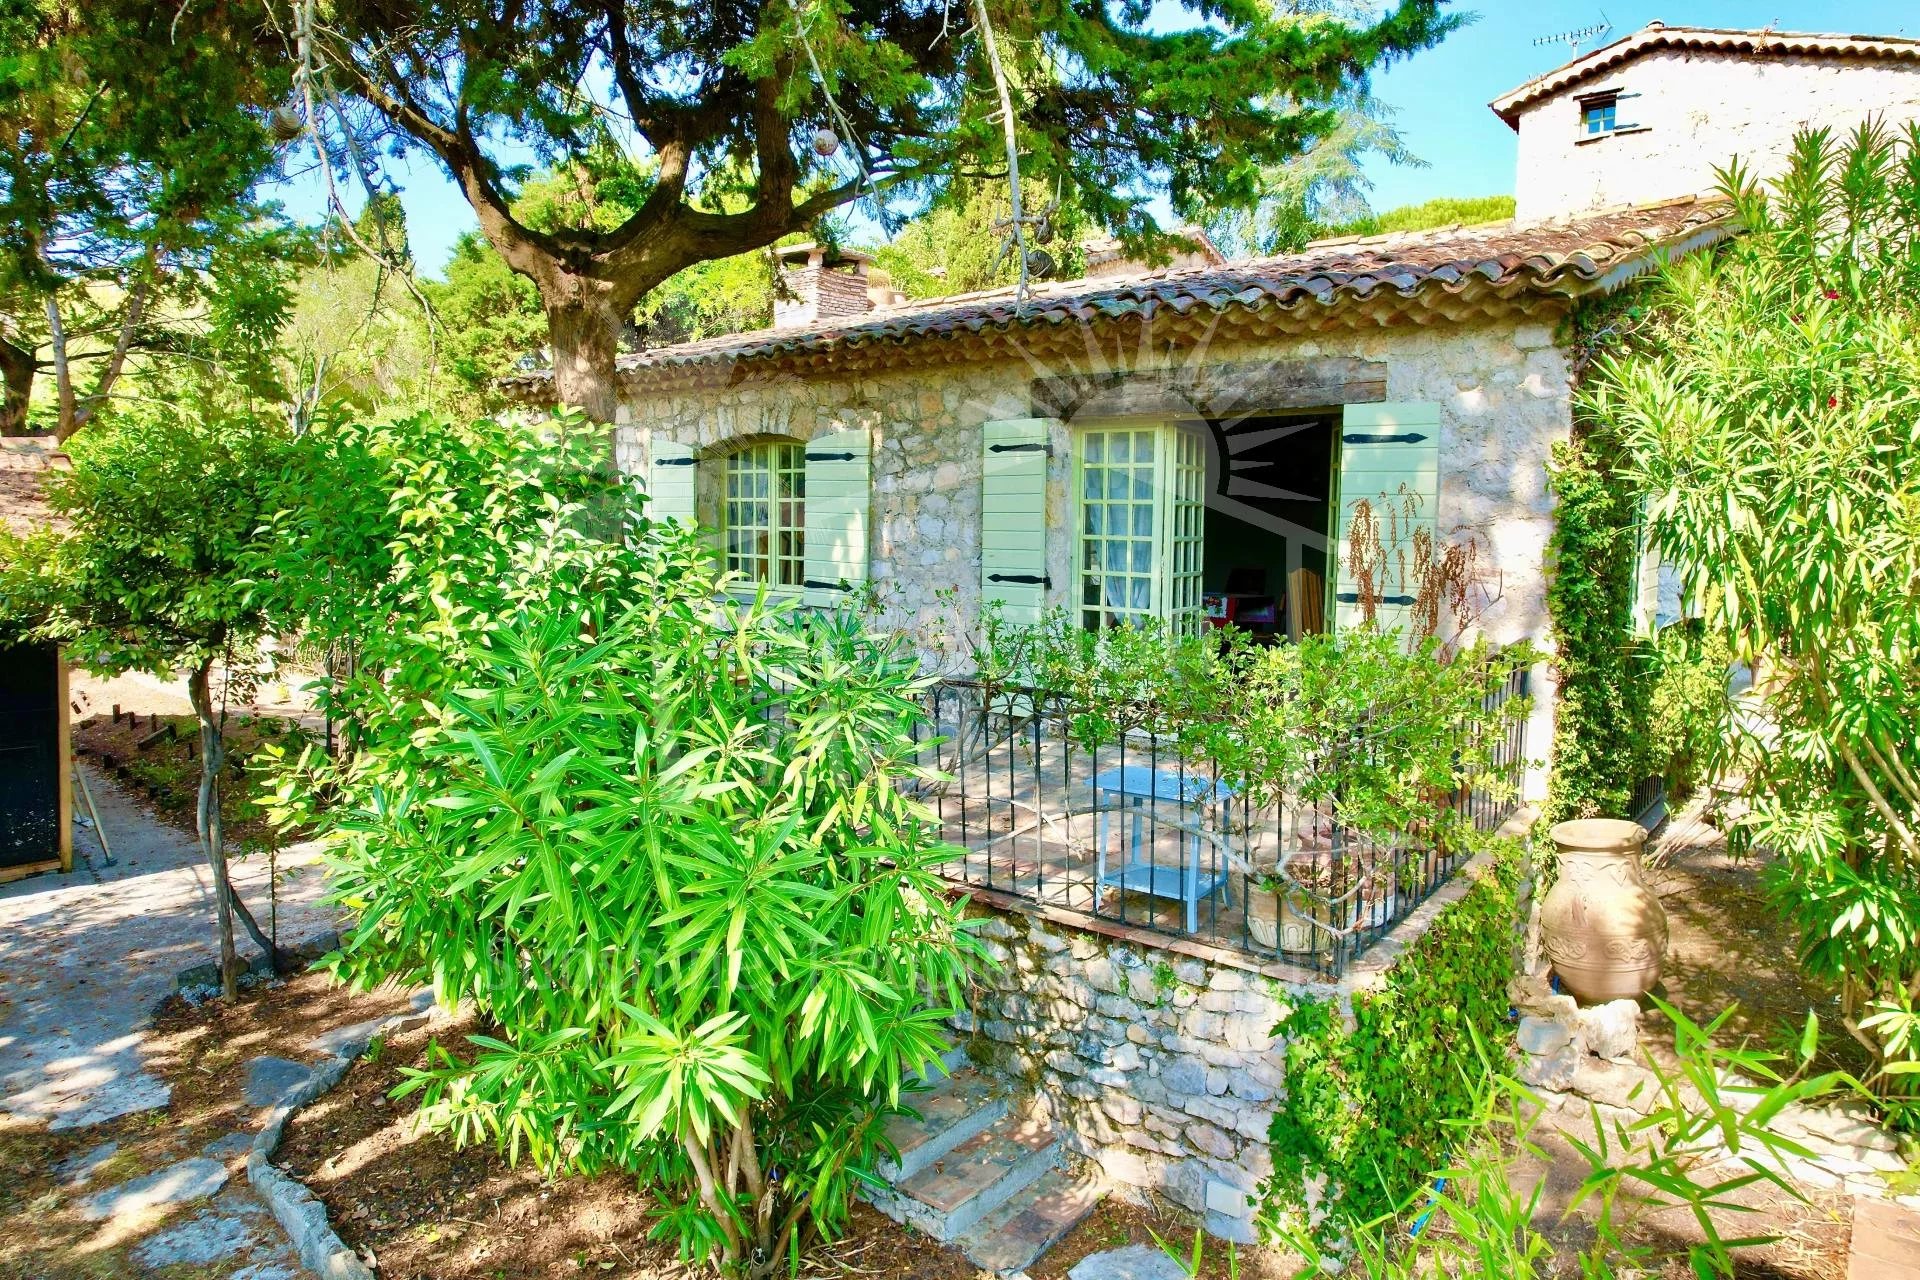 Character property in Antibes